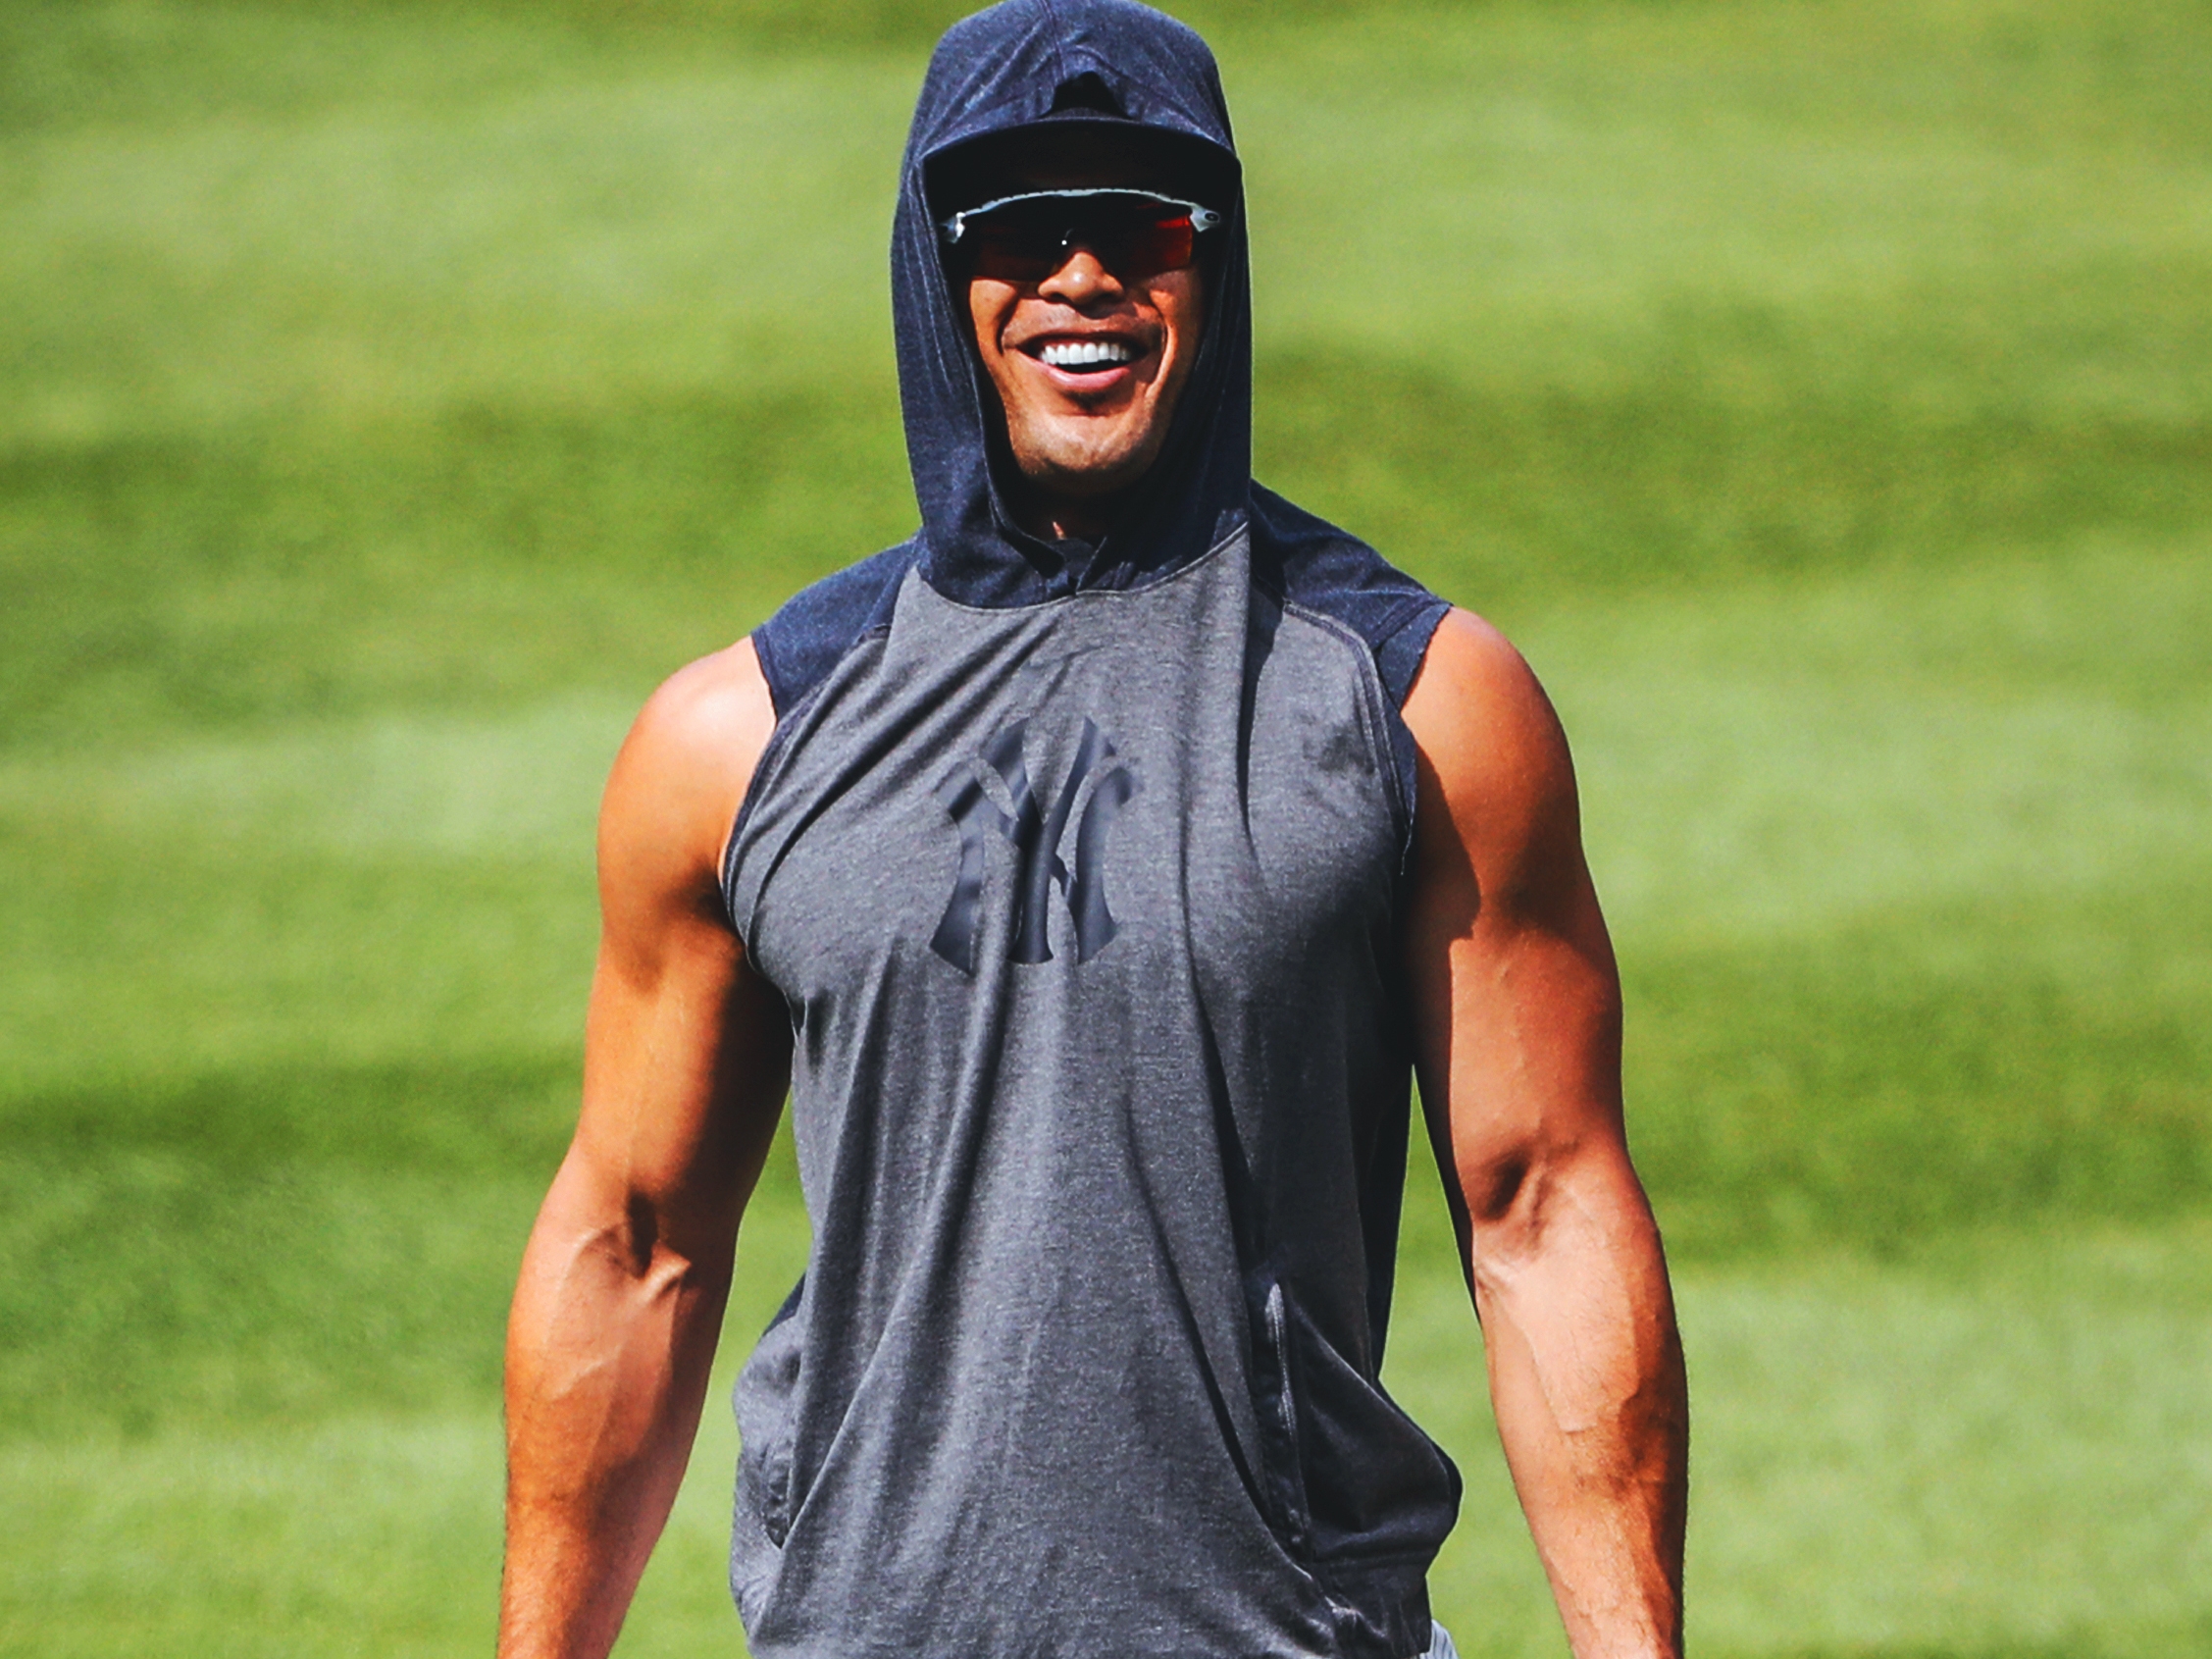 What is Giancarlo Stanton's height?